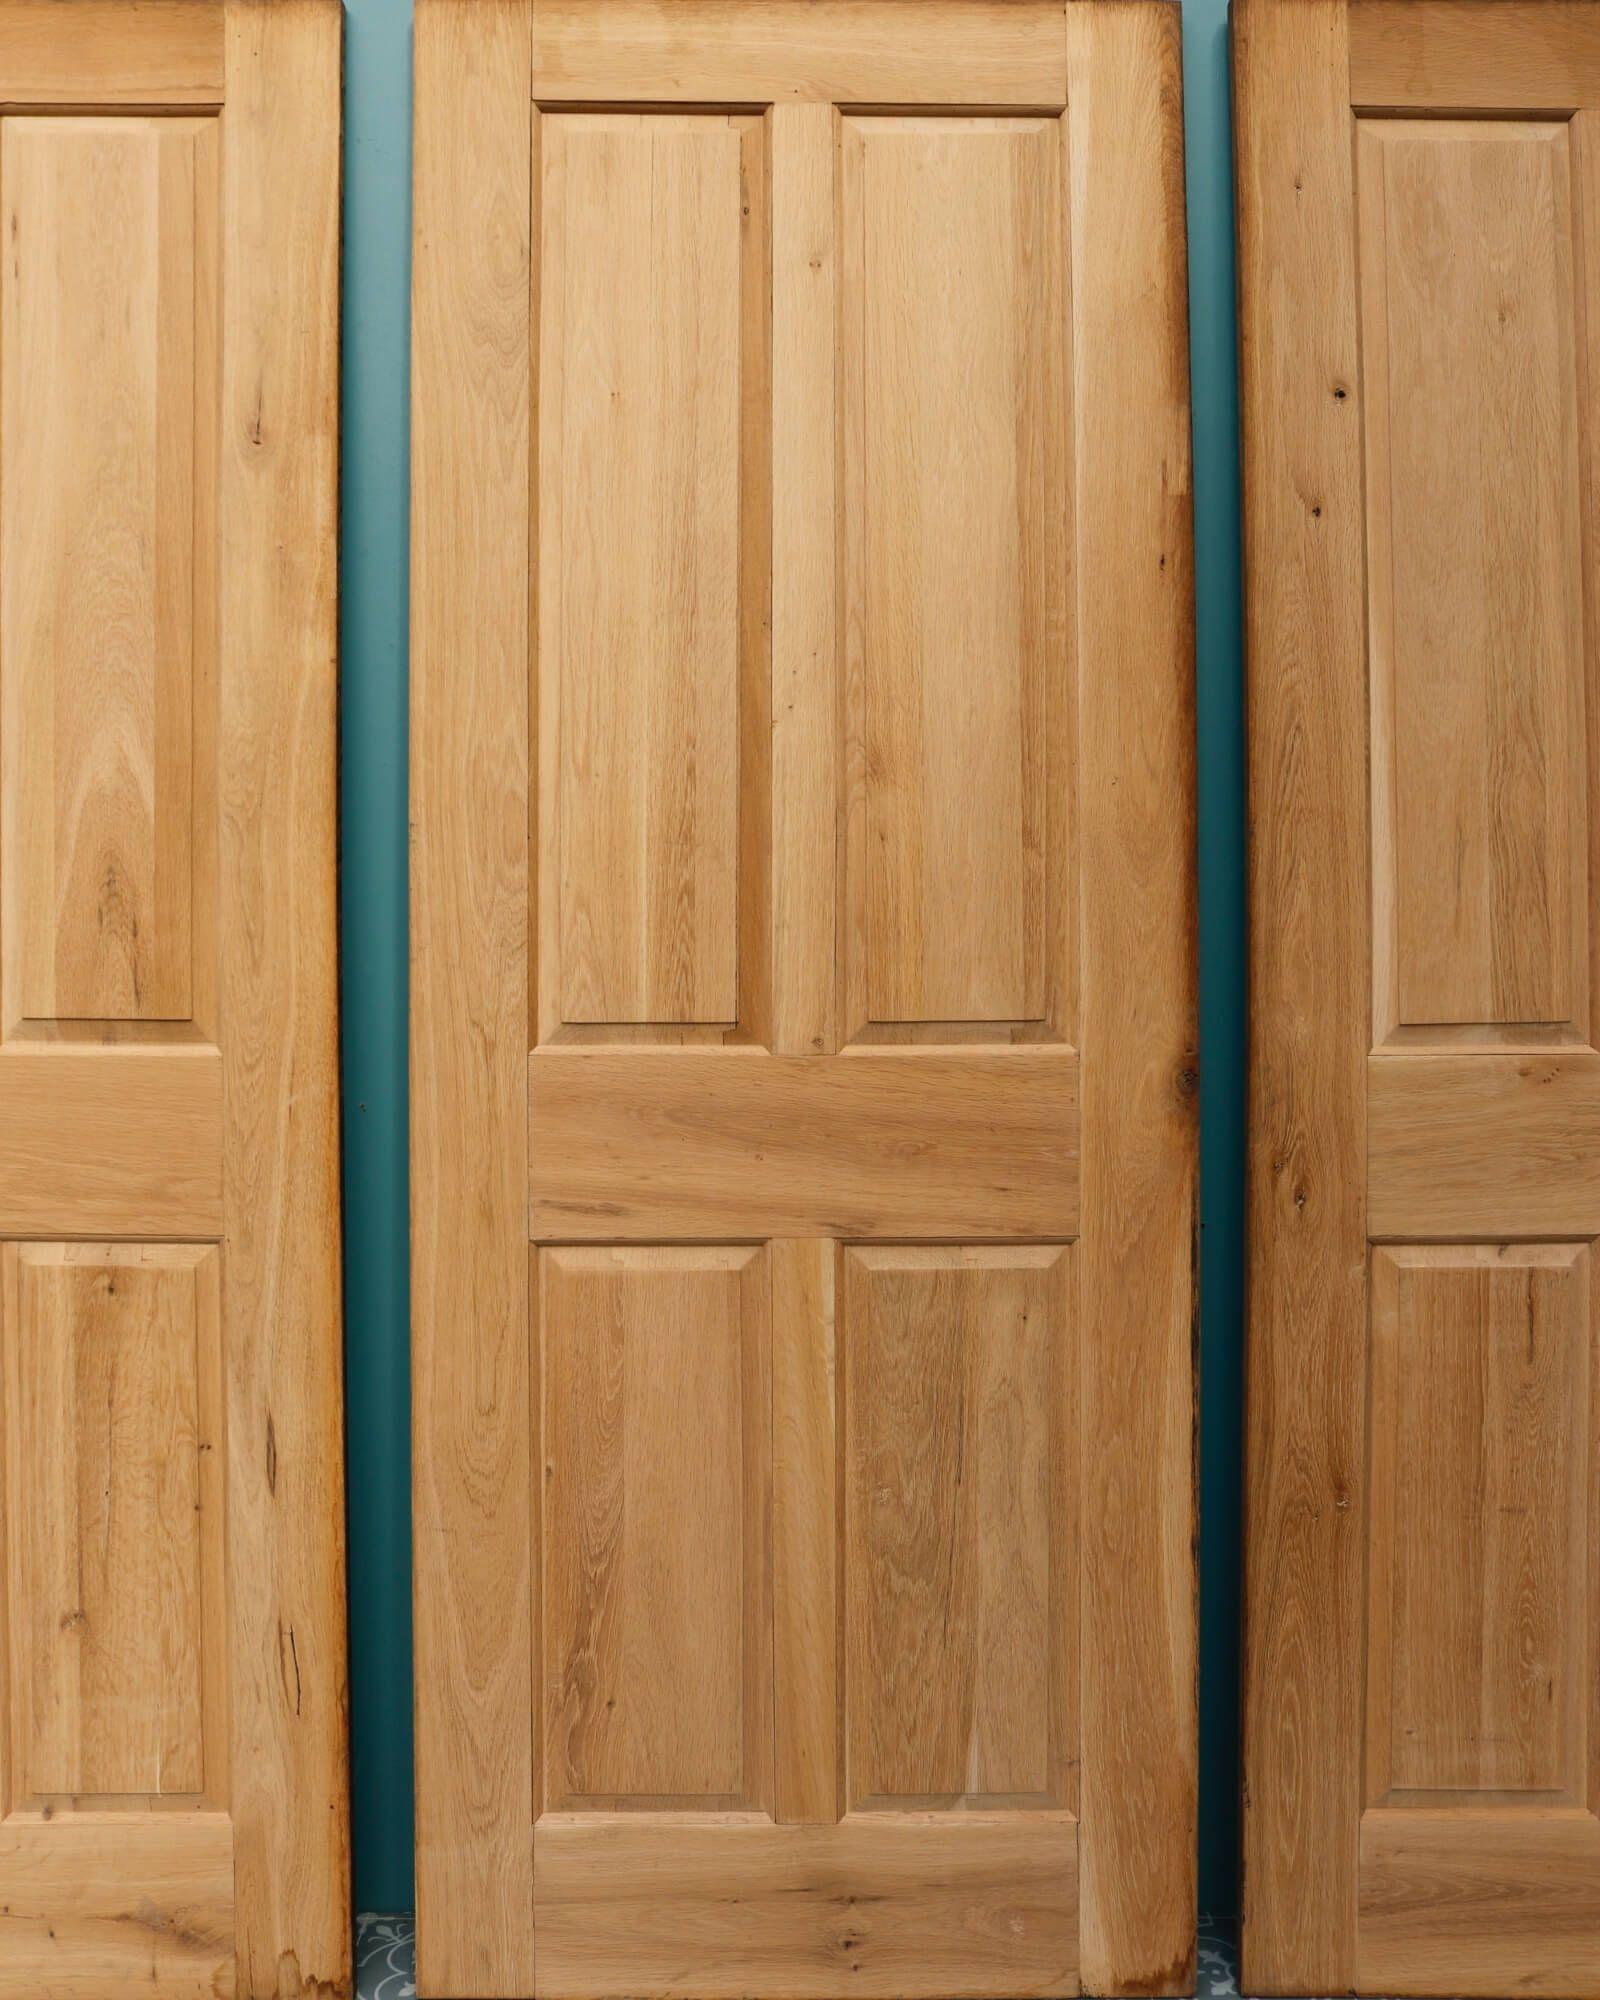 Set of 6 Reclaimed 4-Panel Oak Interior Doors In Fair Condition For Sale In Wormelow, Herefordshire